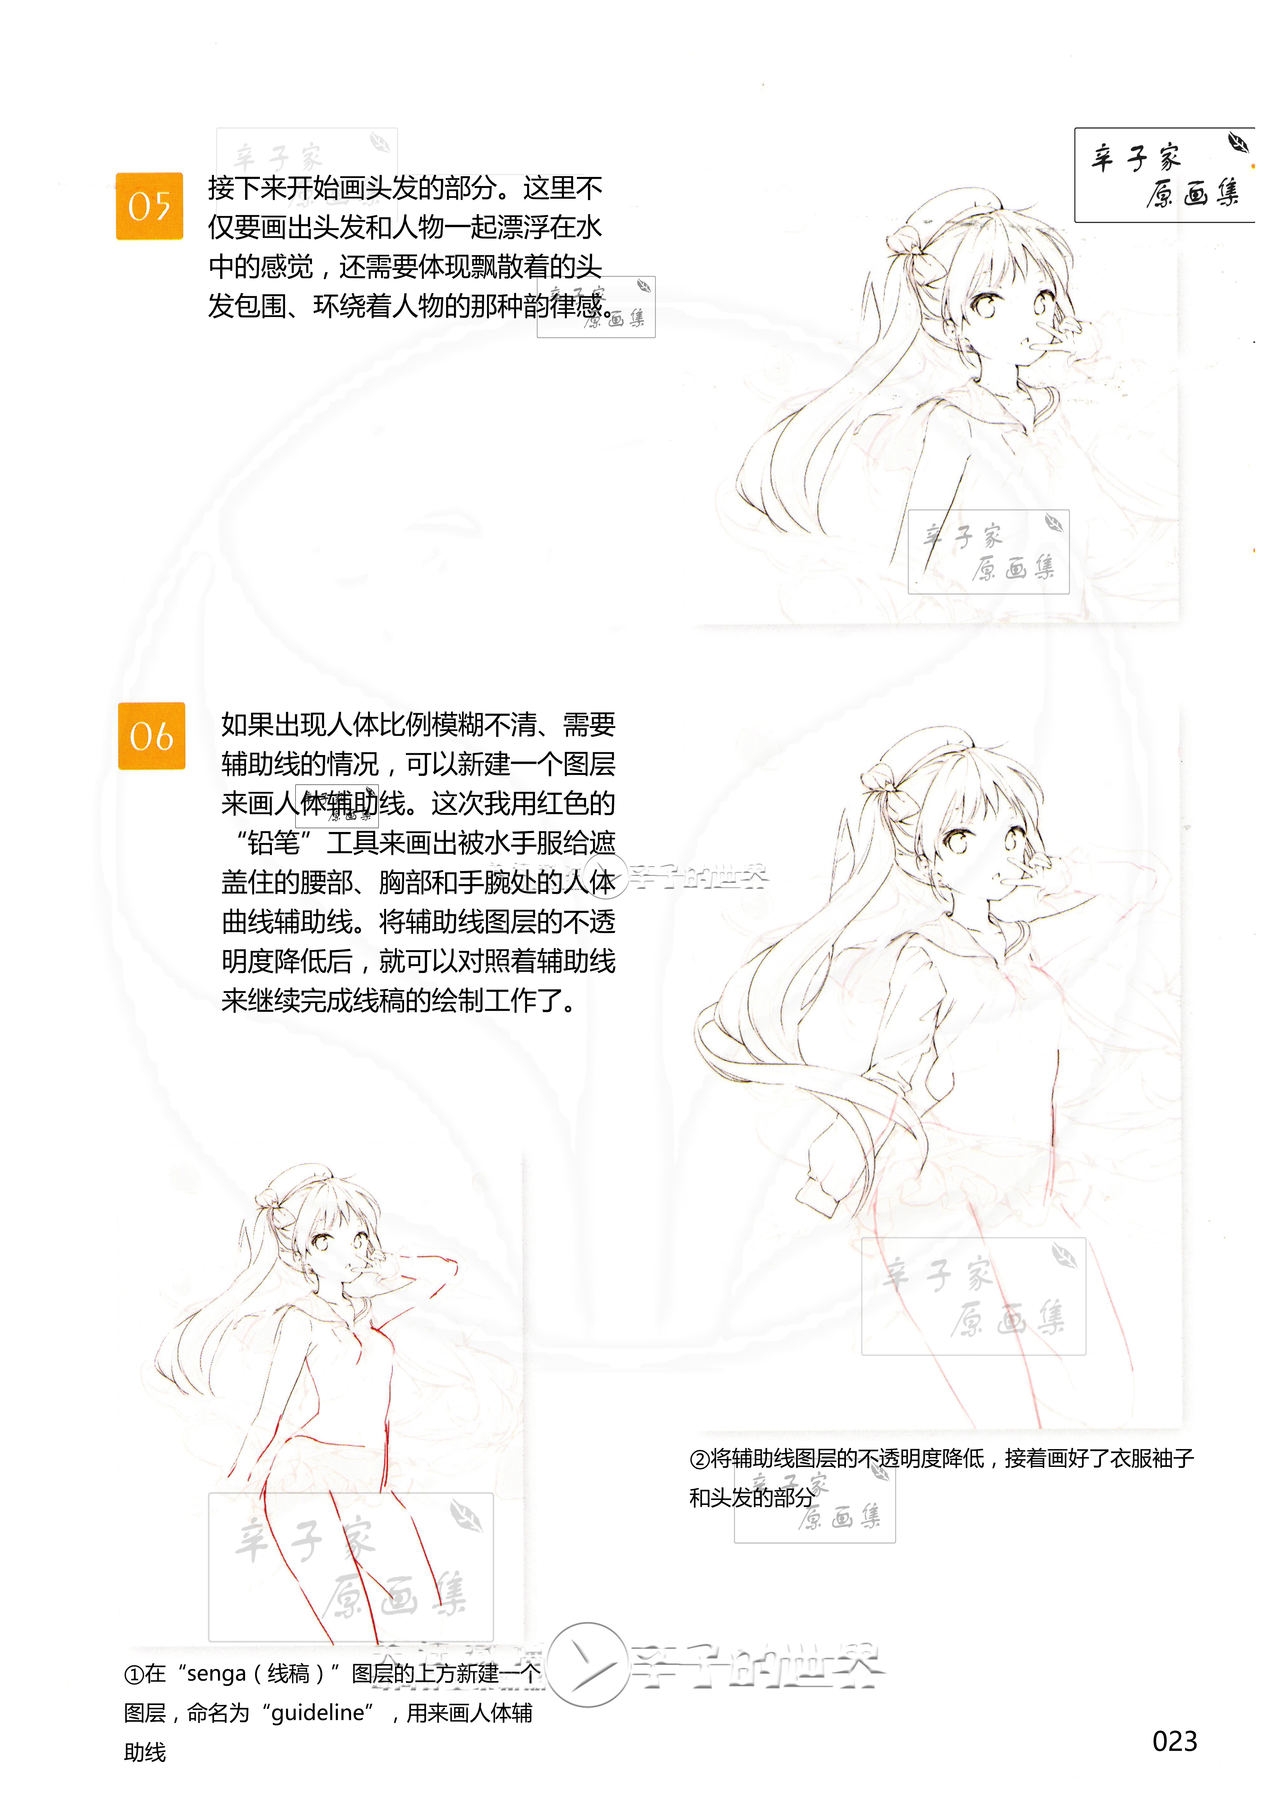 [Anmi] Lets Make ★ Character CG illustration techniques vol.9 [Chinese] 22